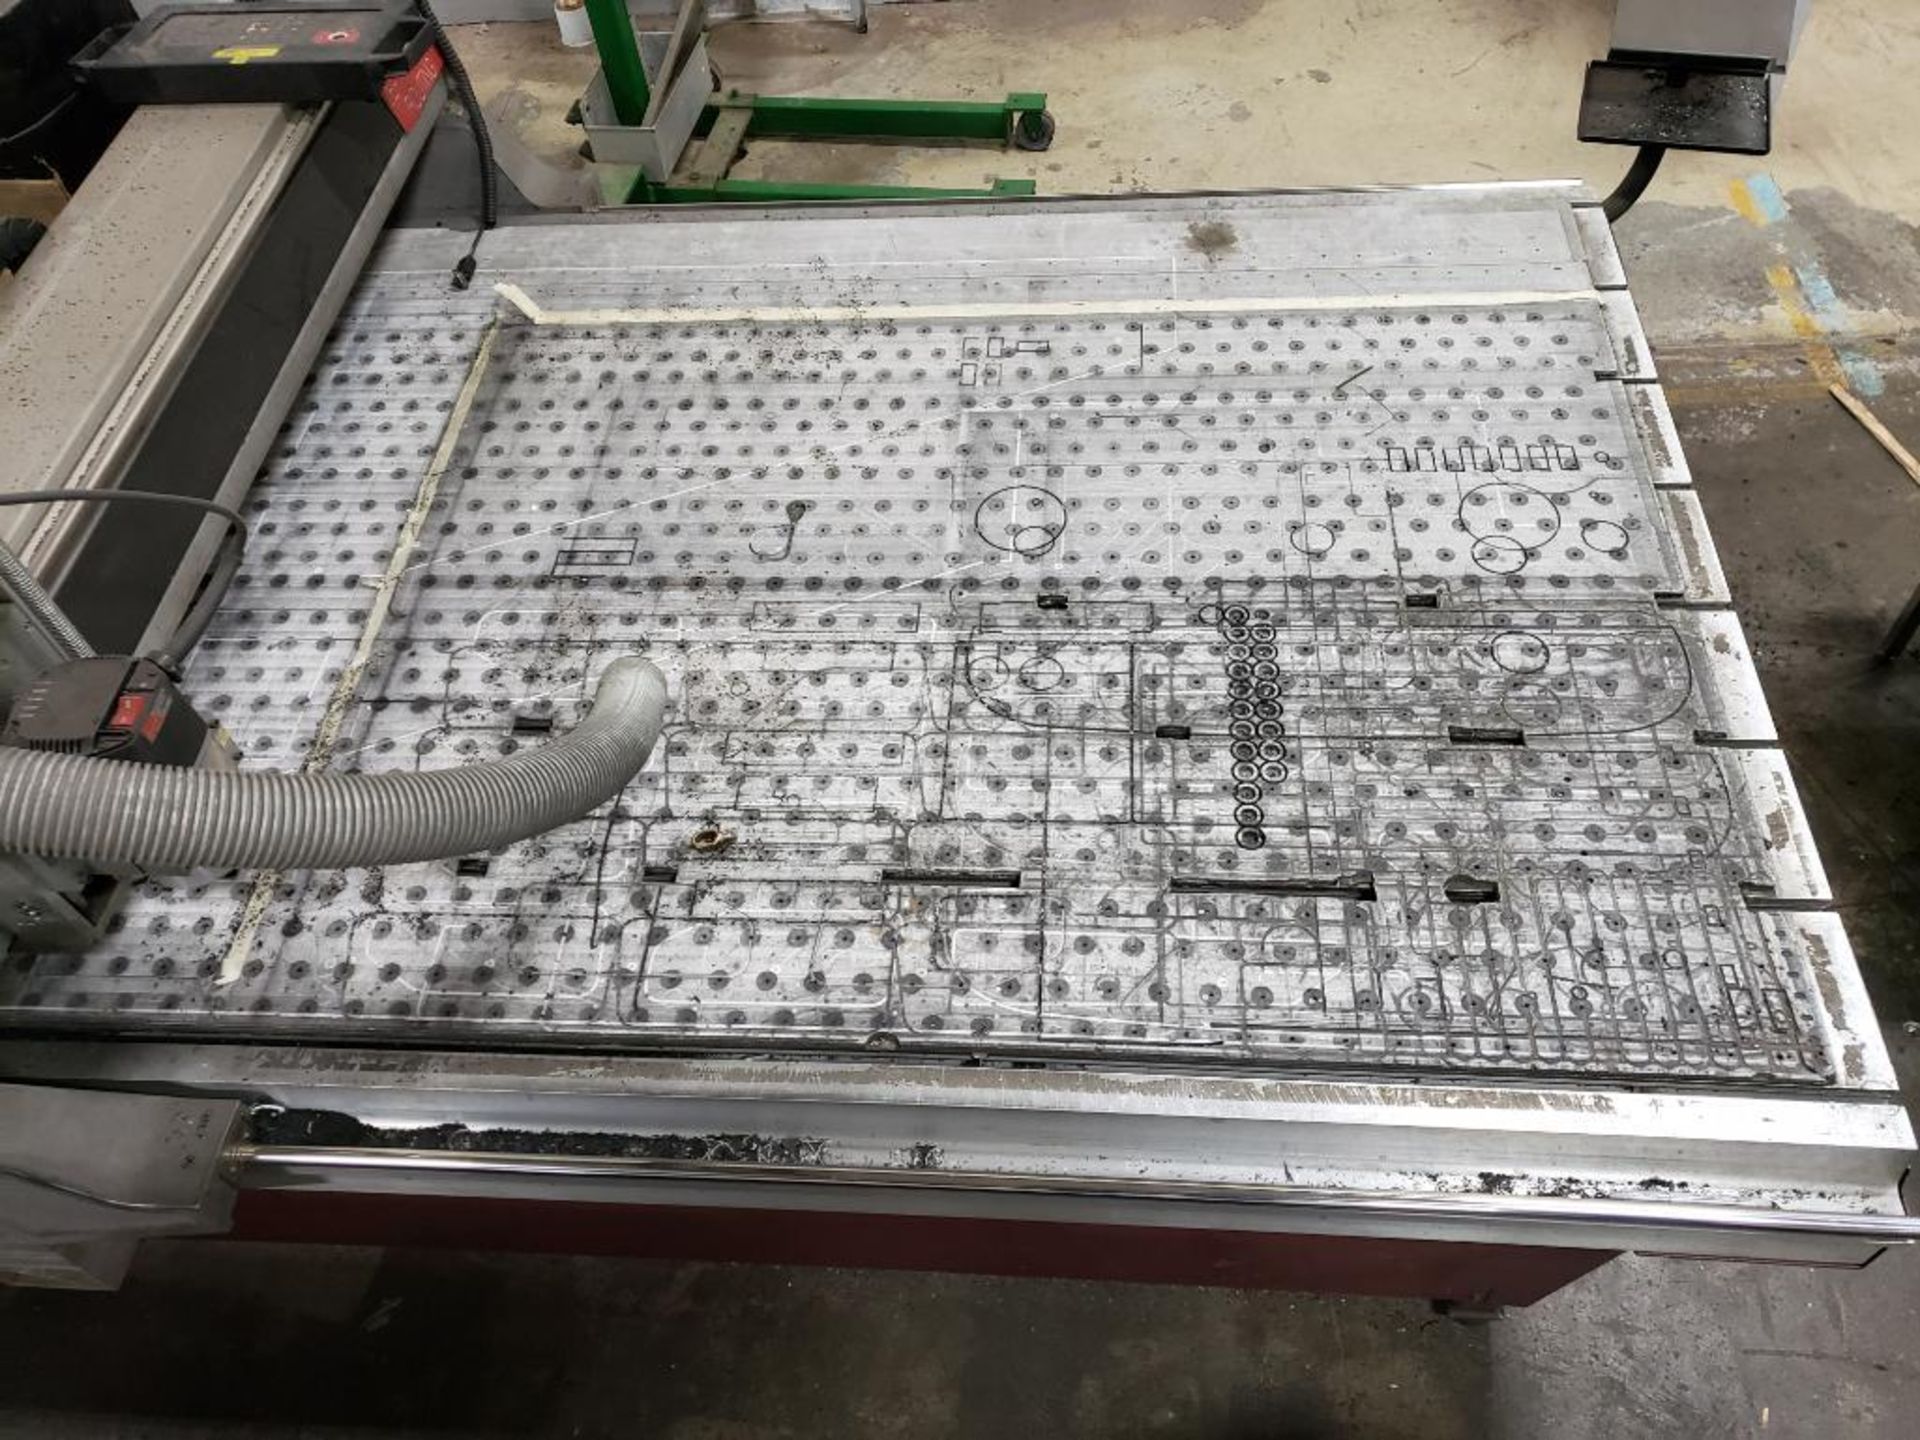 (Parts/Repairable) Gerber Sabre Model 408 CNC router. 54in x 121in table. 208-240v single phase. - Image 2 of 27